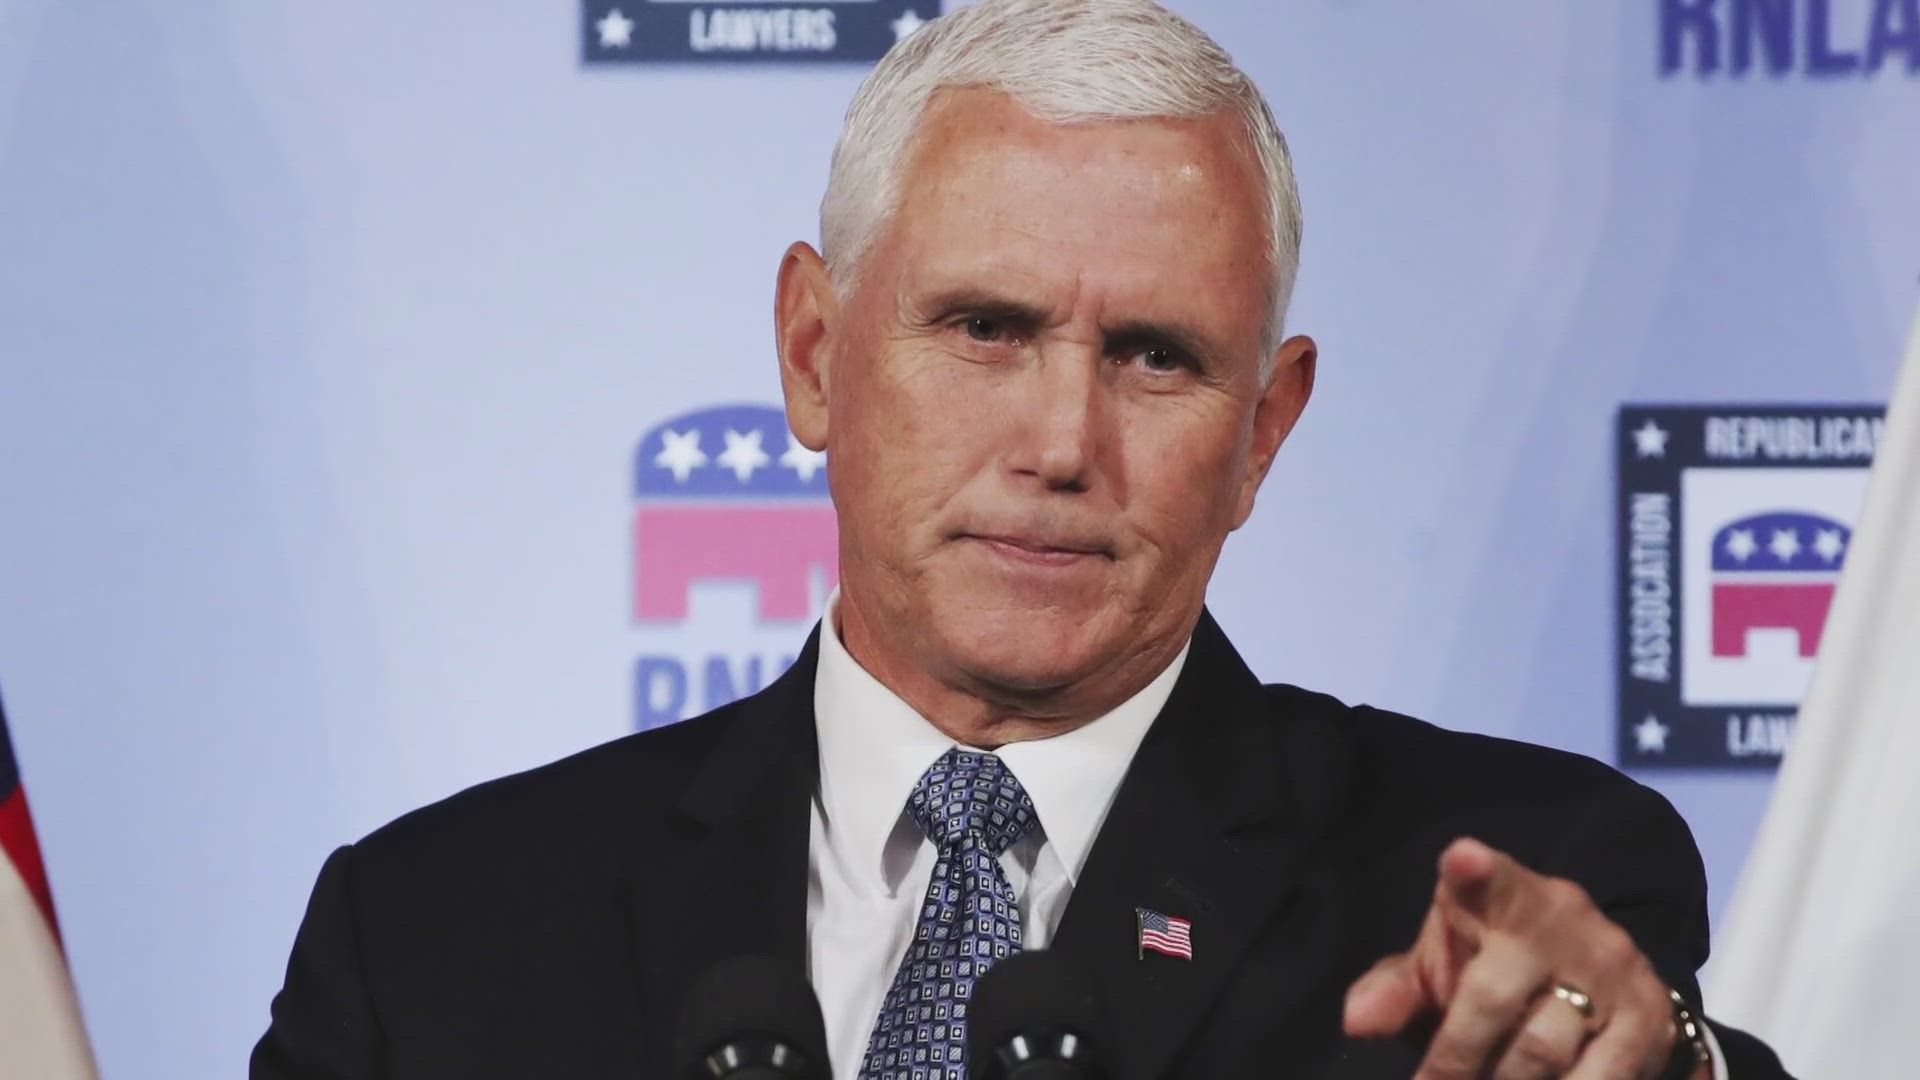 The FBI discovered documents with classified markings at Pence ’s Carmel, Indiana home in January and February.